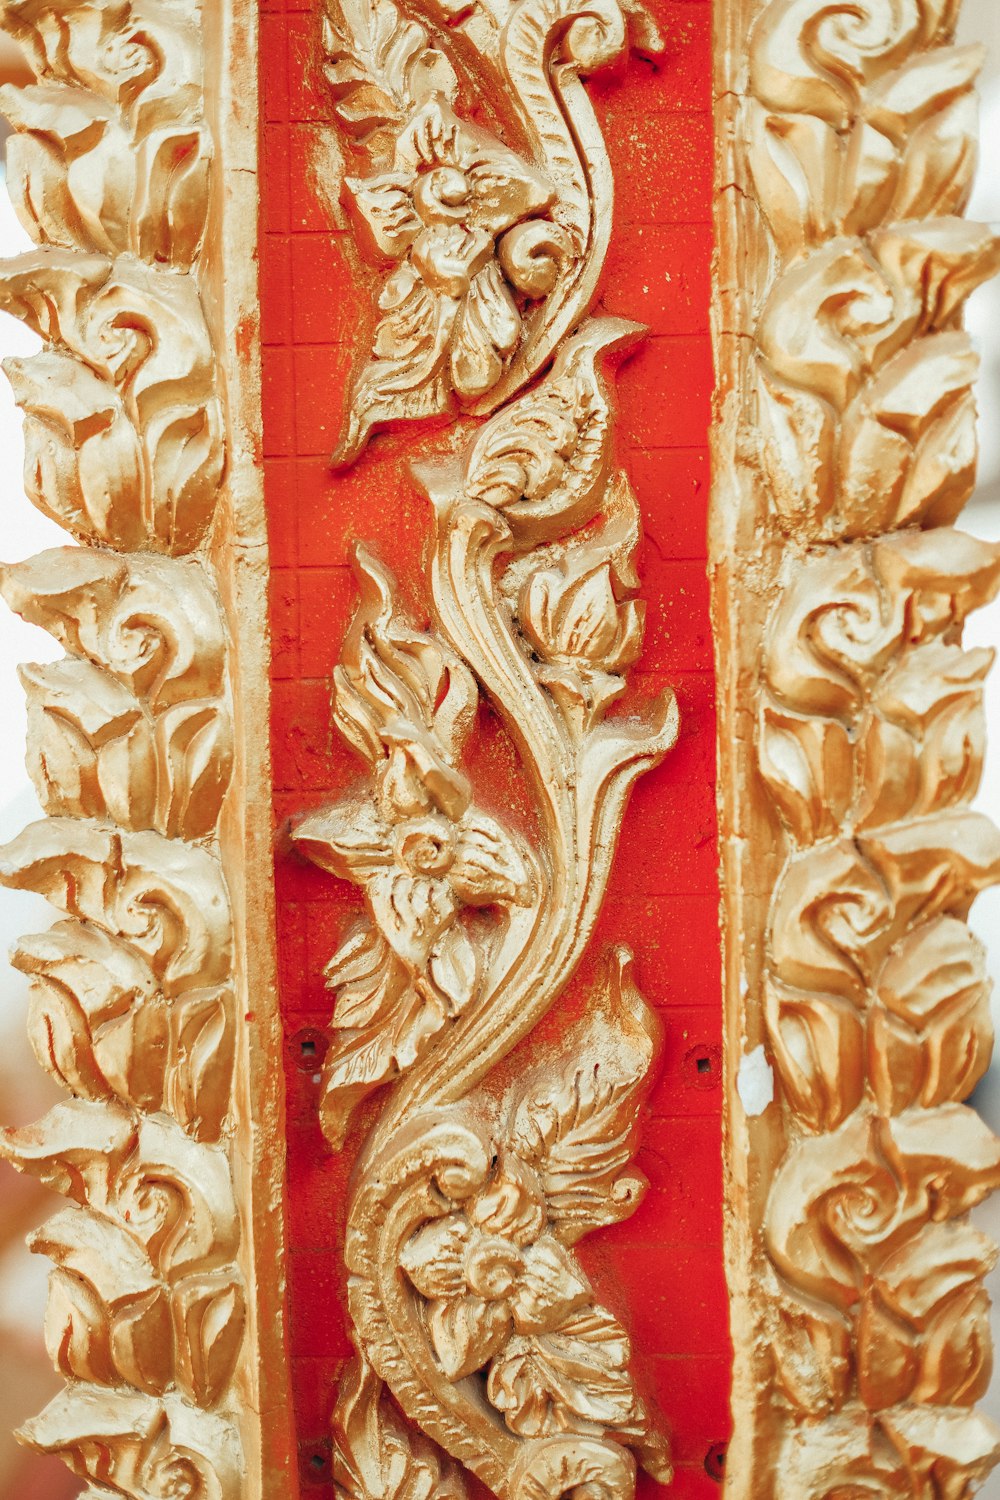 gold and red floral embossed wall decor